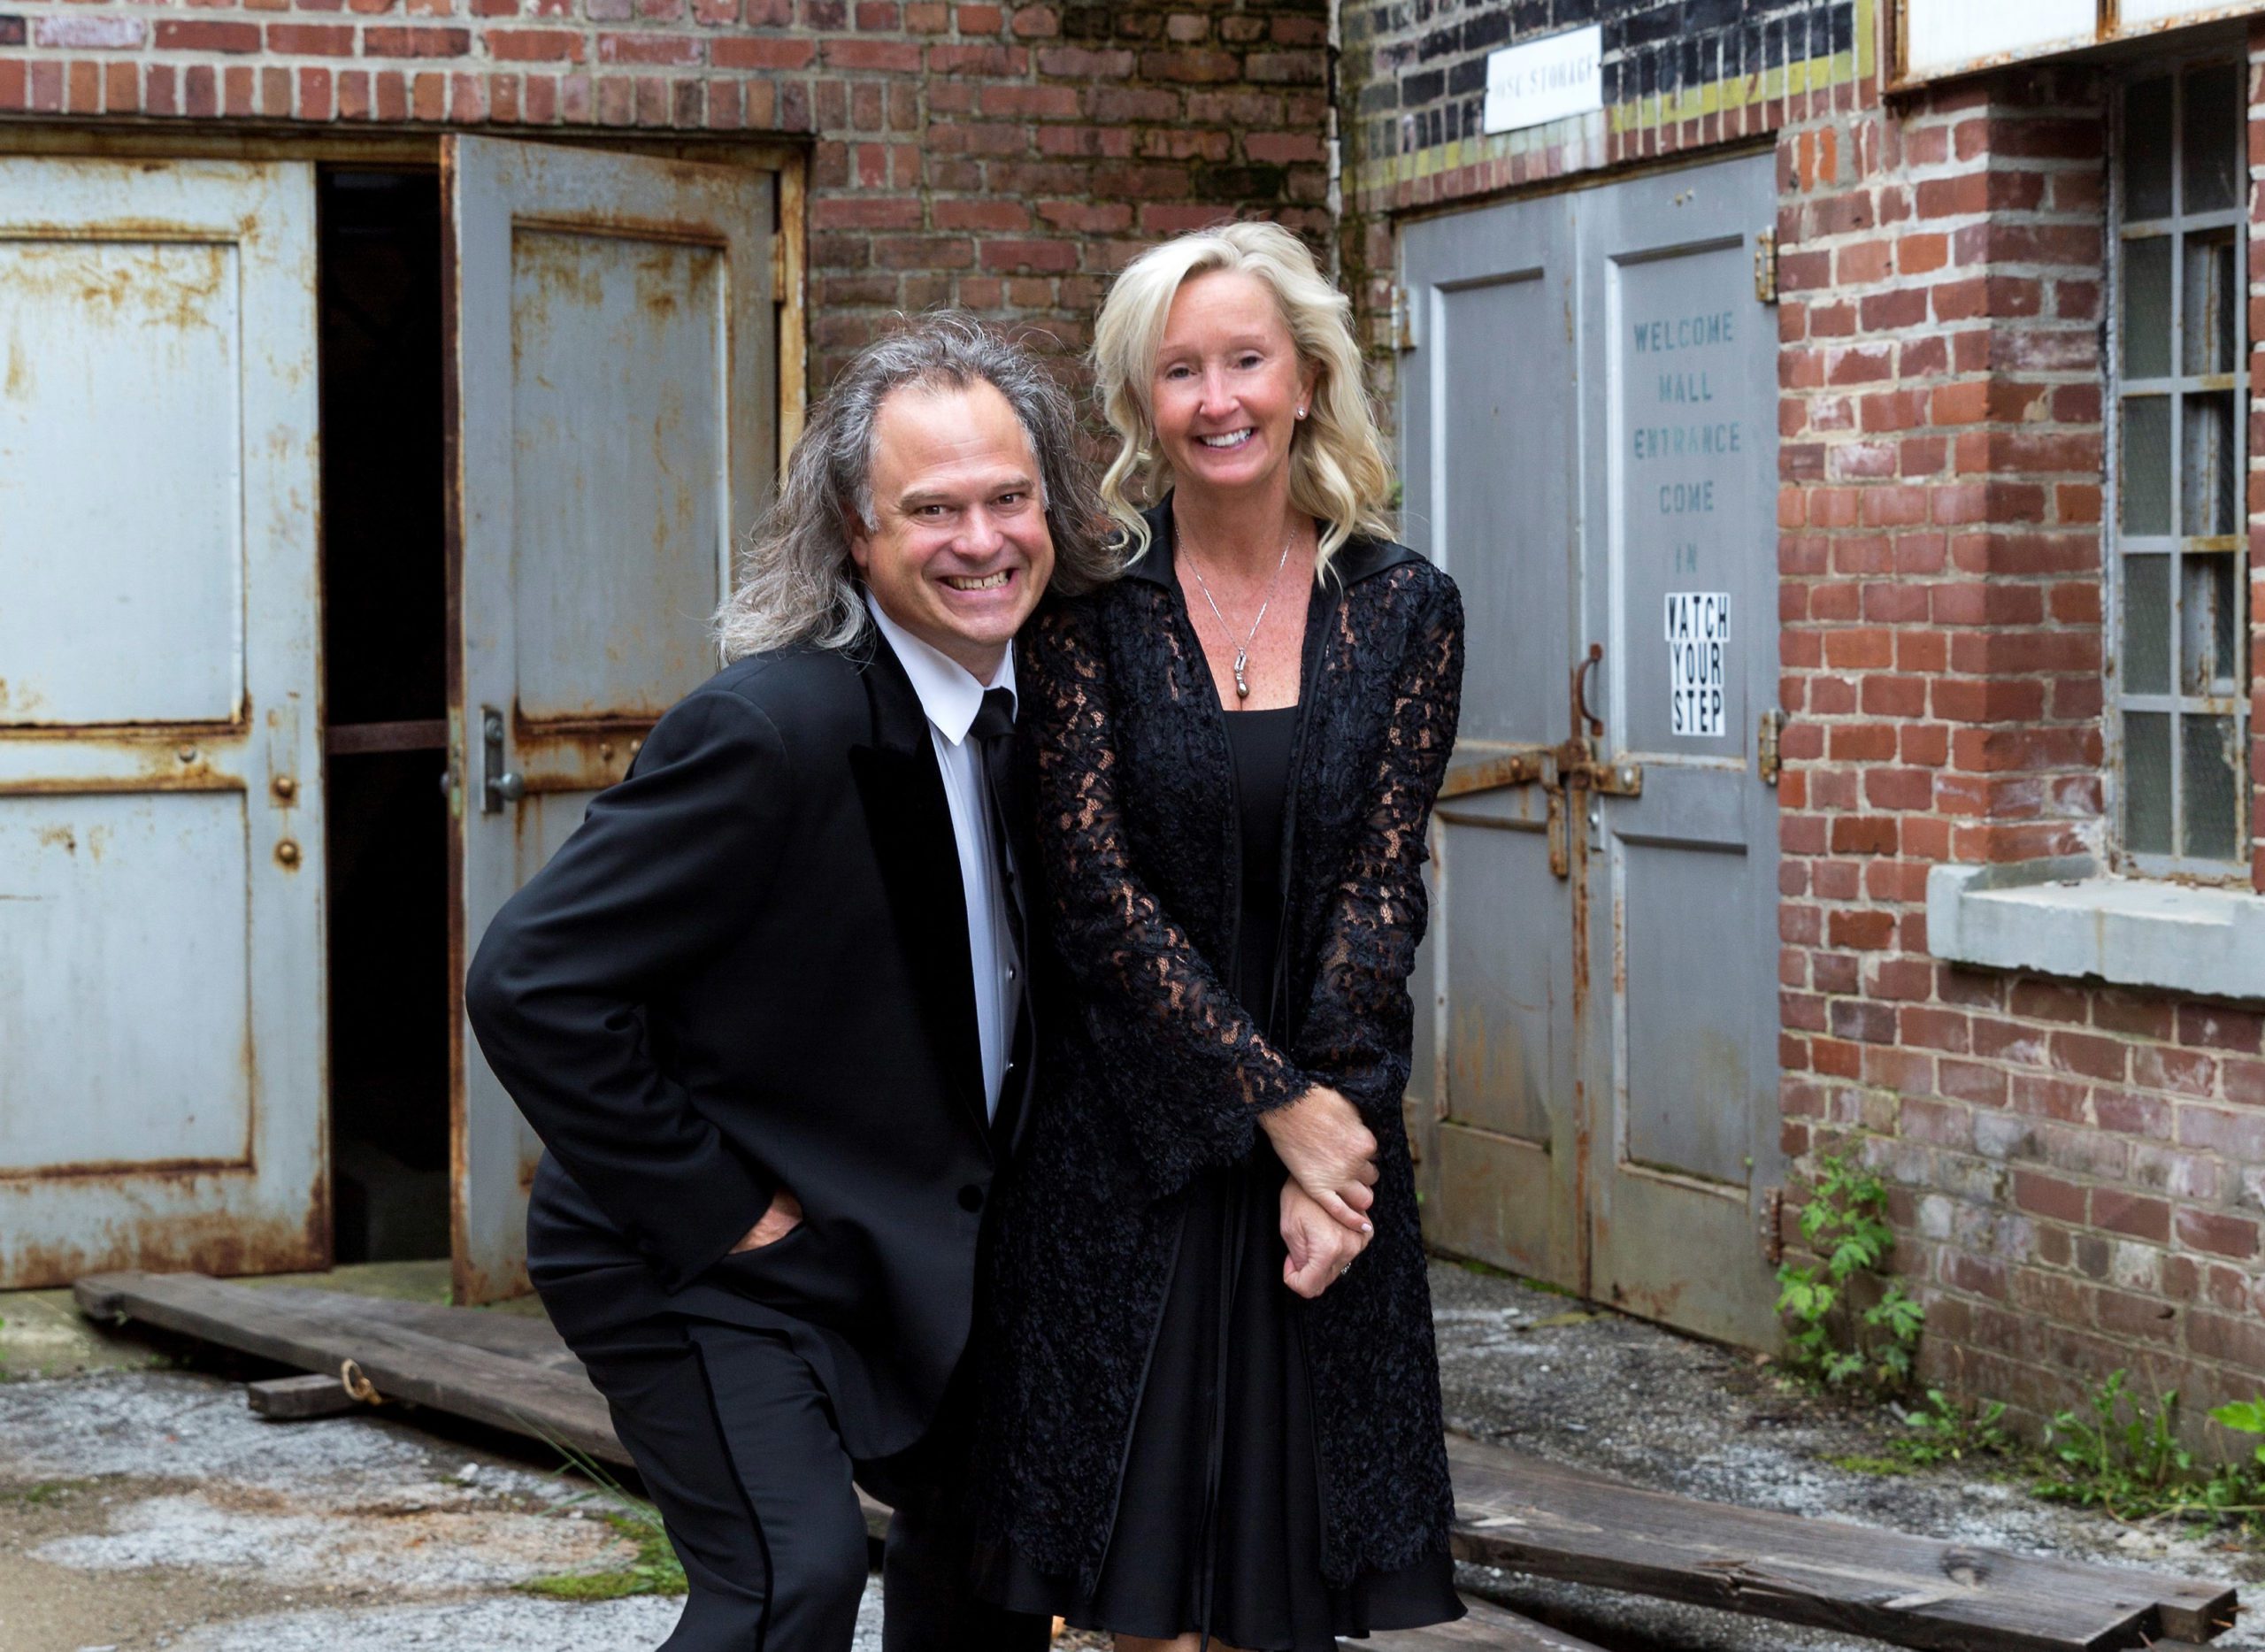 Man in his mid-fifties with longer hair, wearing a tux and sneakers, is standing in a mid-crouch with his right hand in his front pocket and left arm around a woman in a cocktail dress, standing with her left leg crossed in front of her right. They are outside an old, neglected industrial brick warehouse with rusted steel doors. The both have happy, friendly smiles, and his smile looks a little mischievous. They are Clemson University alumni, husband Brook and wife Pam Smith of Kentucky.